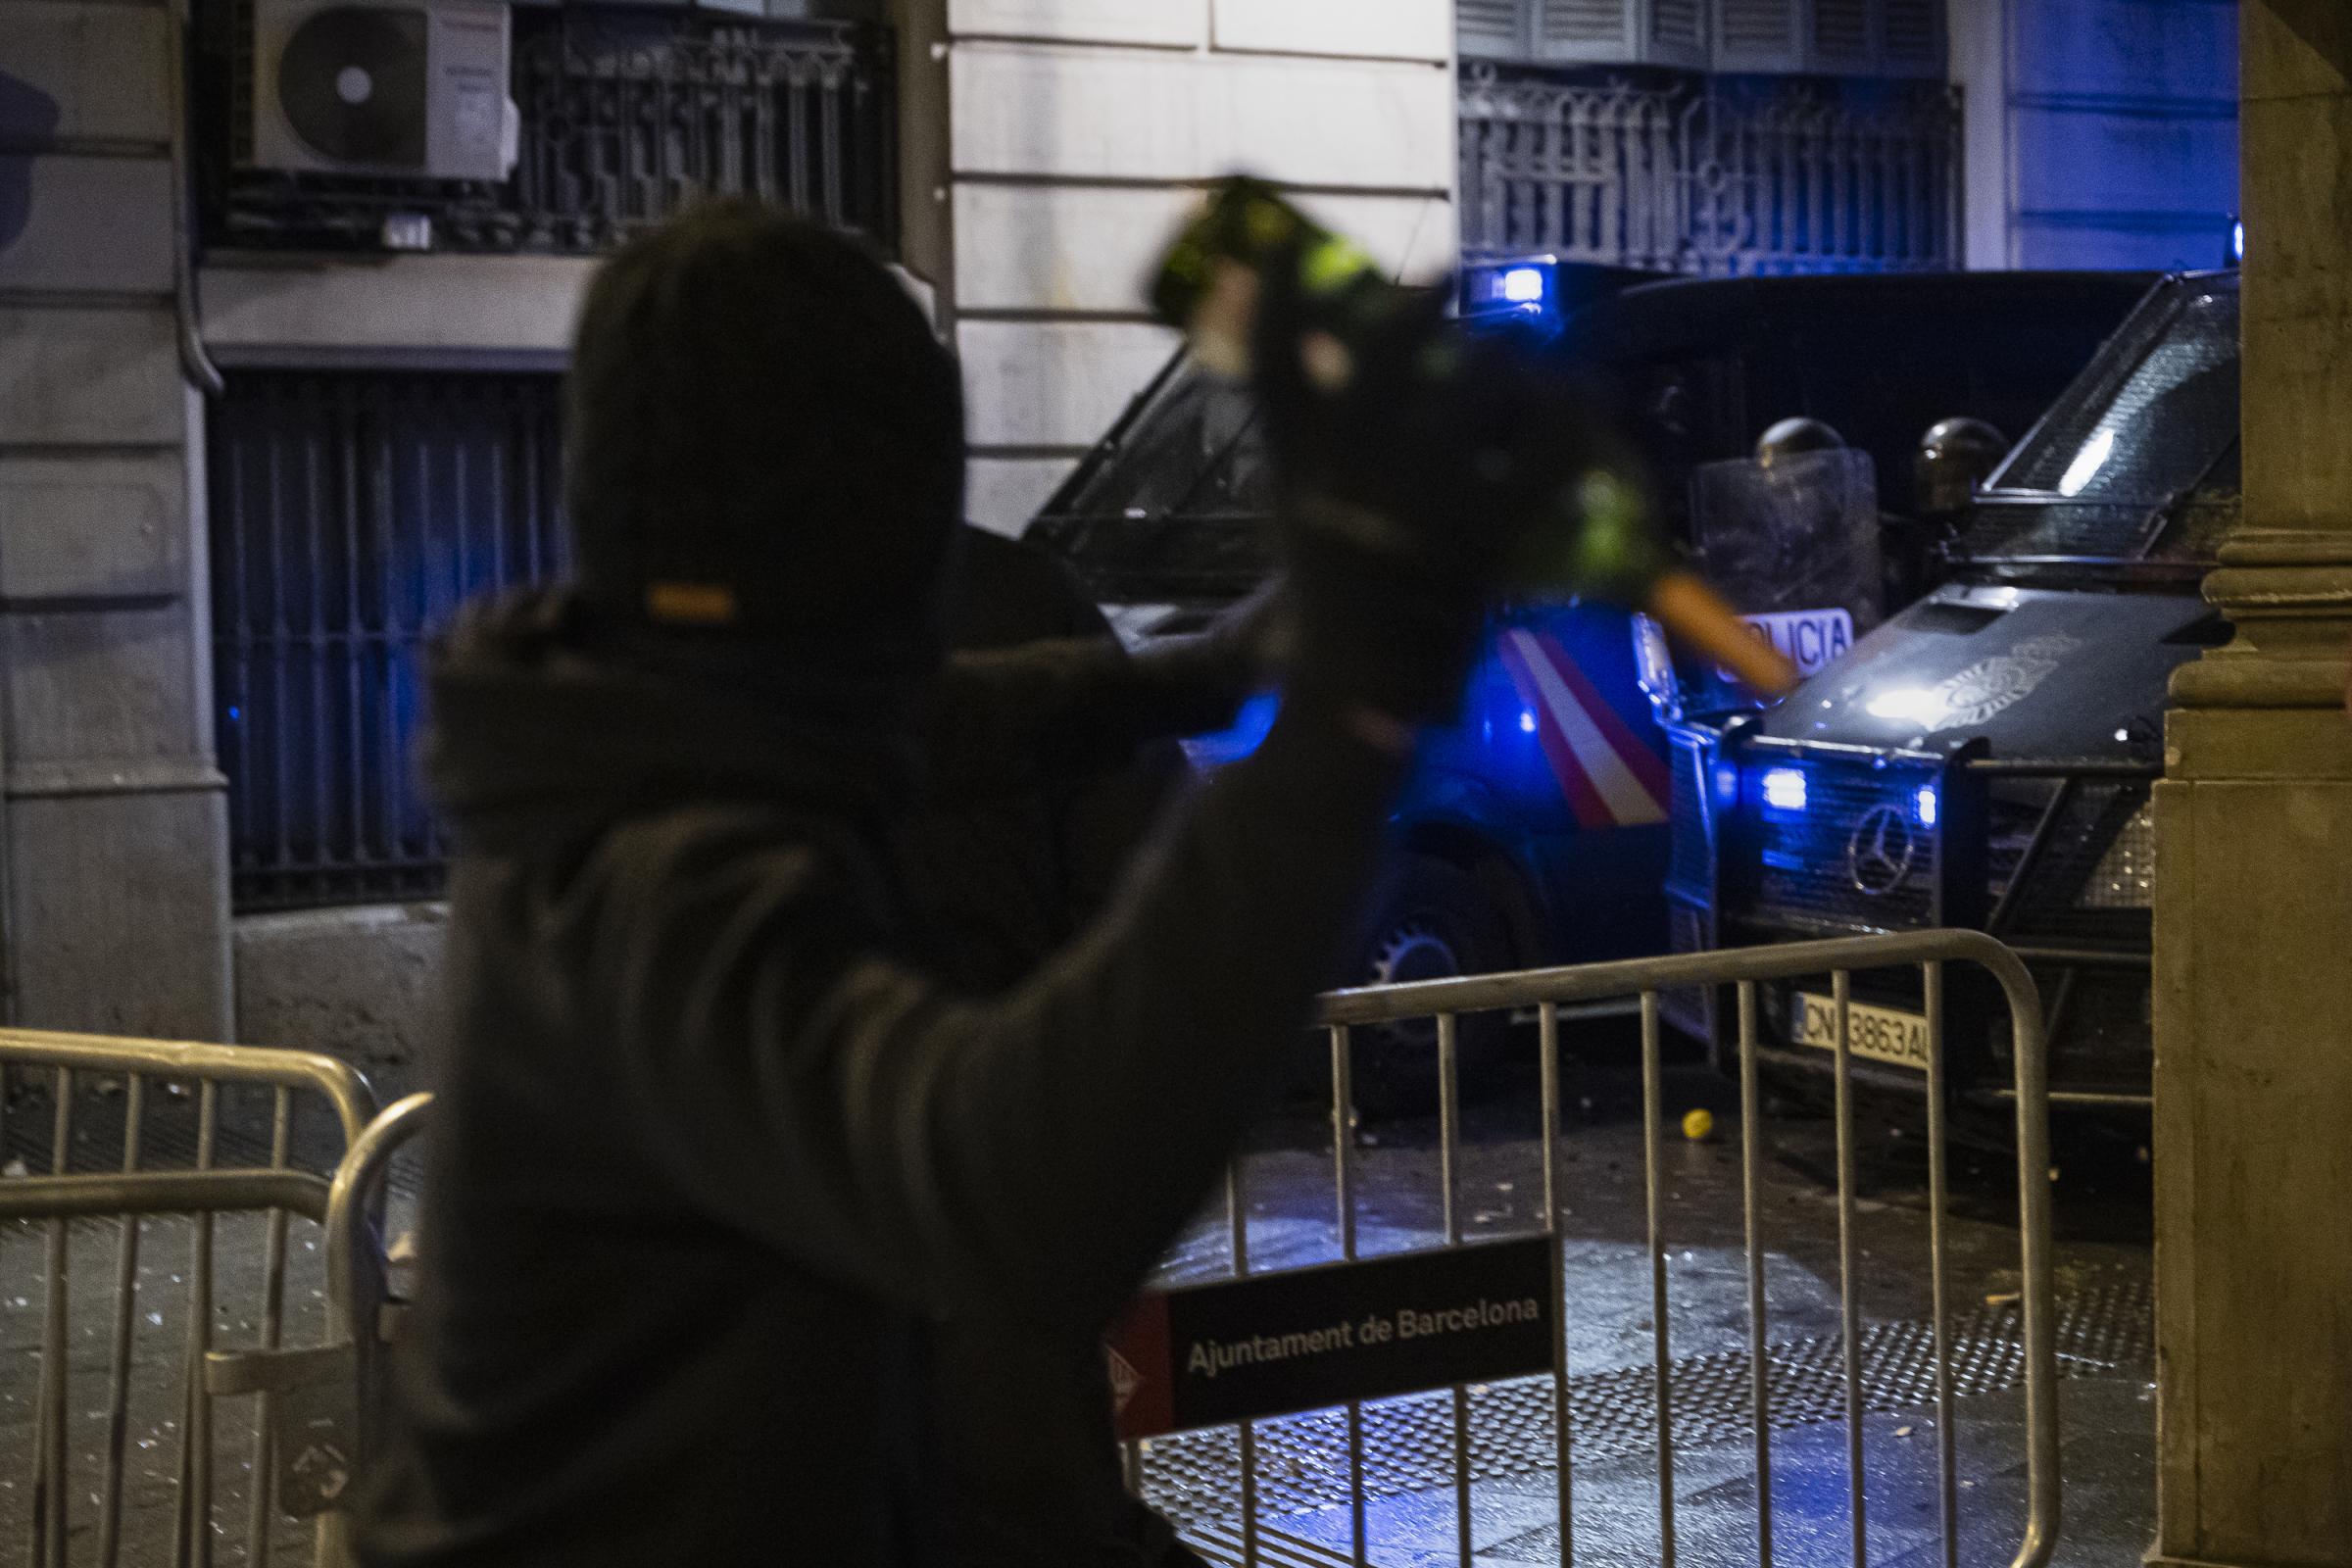 A young man throws a glass bottle at the national police in Via Laietana, Barcelona.